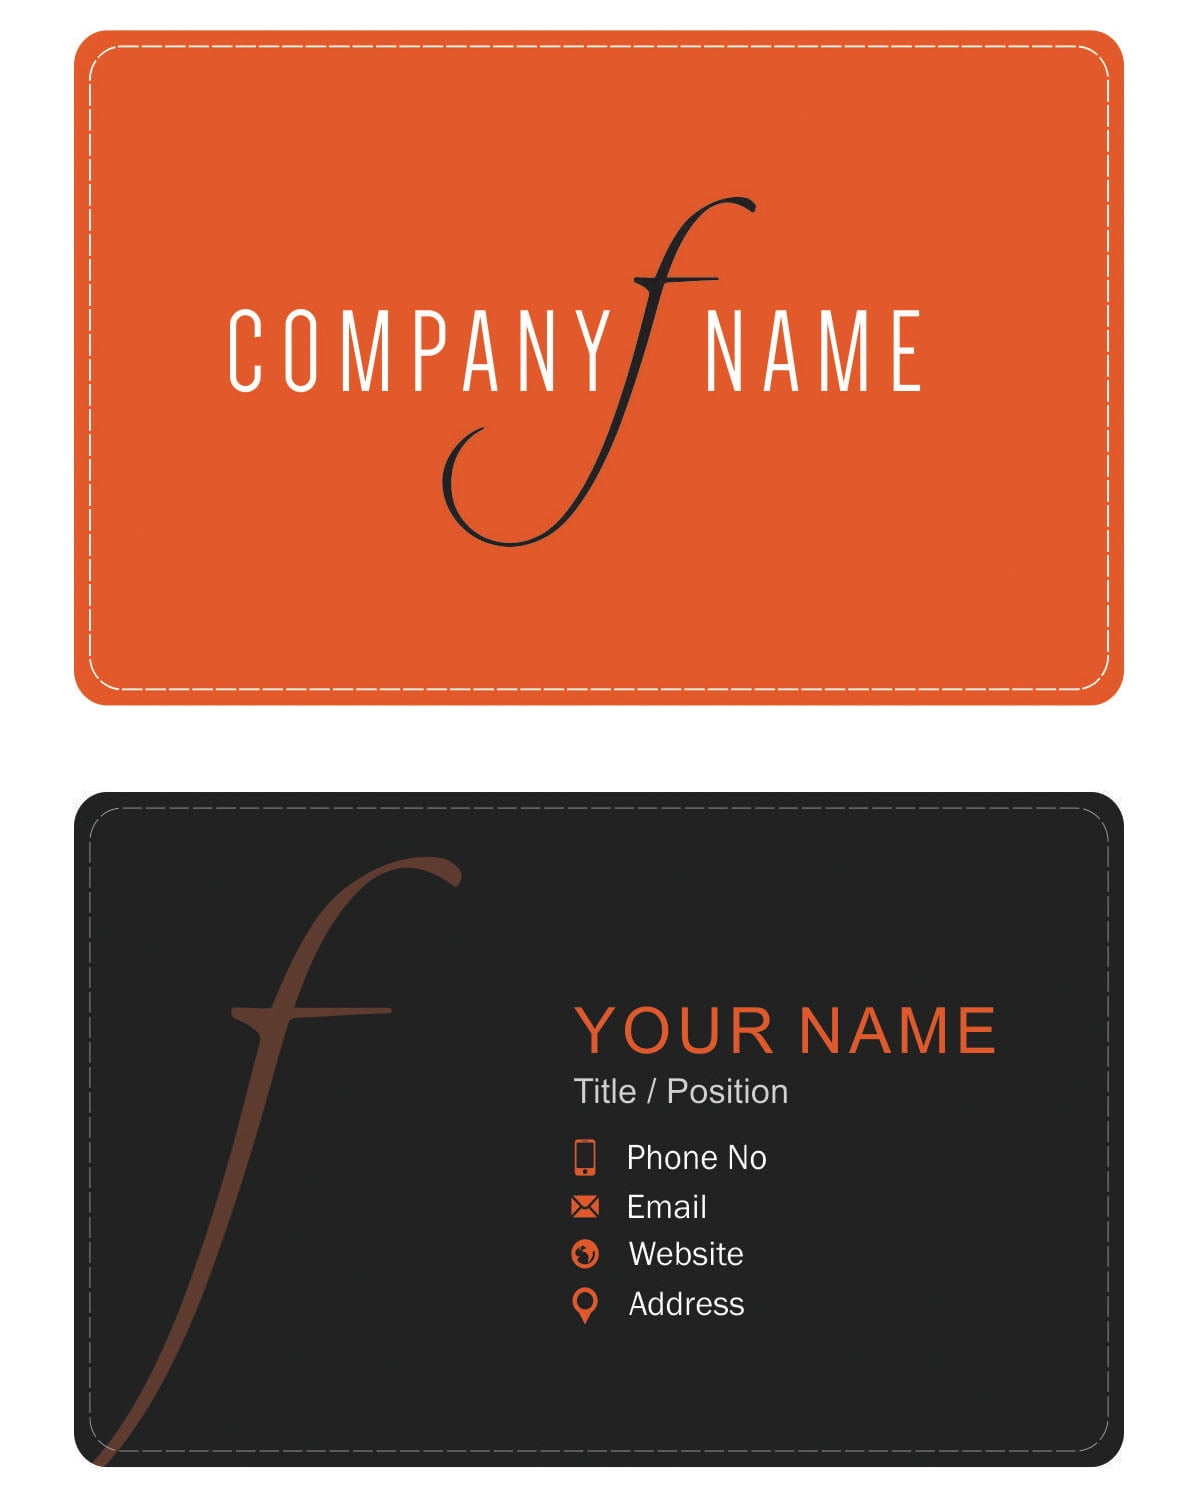 design-your-own-business-cards-home-design-ideas